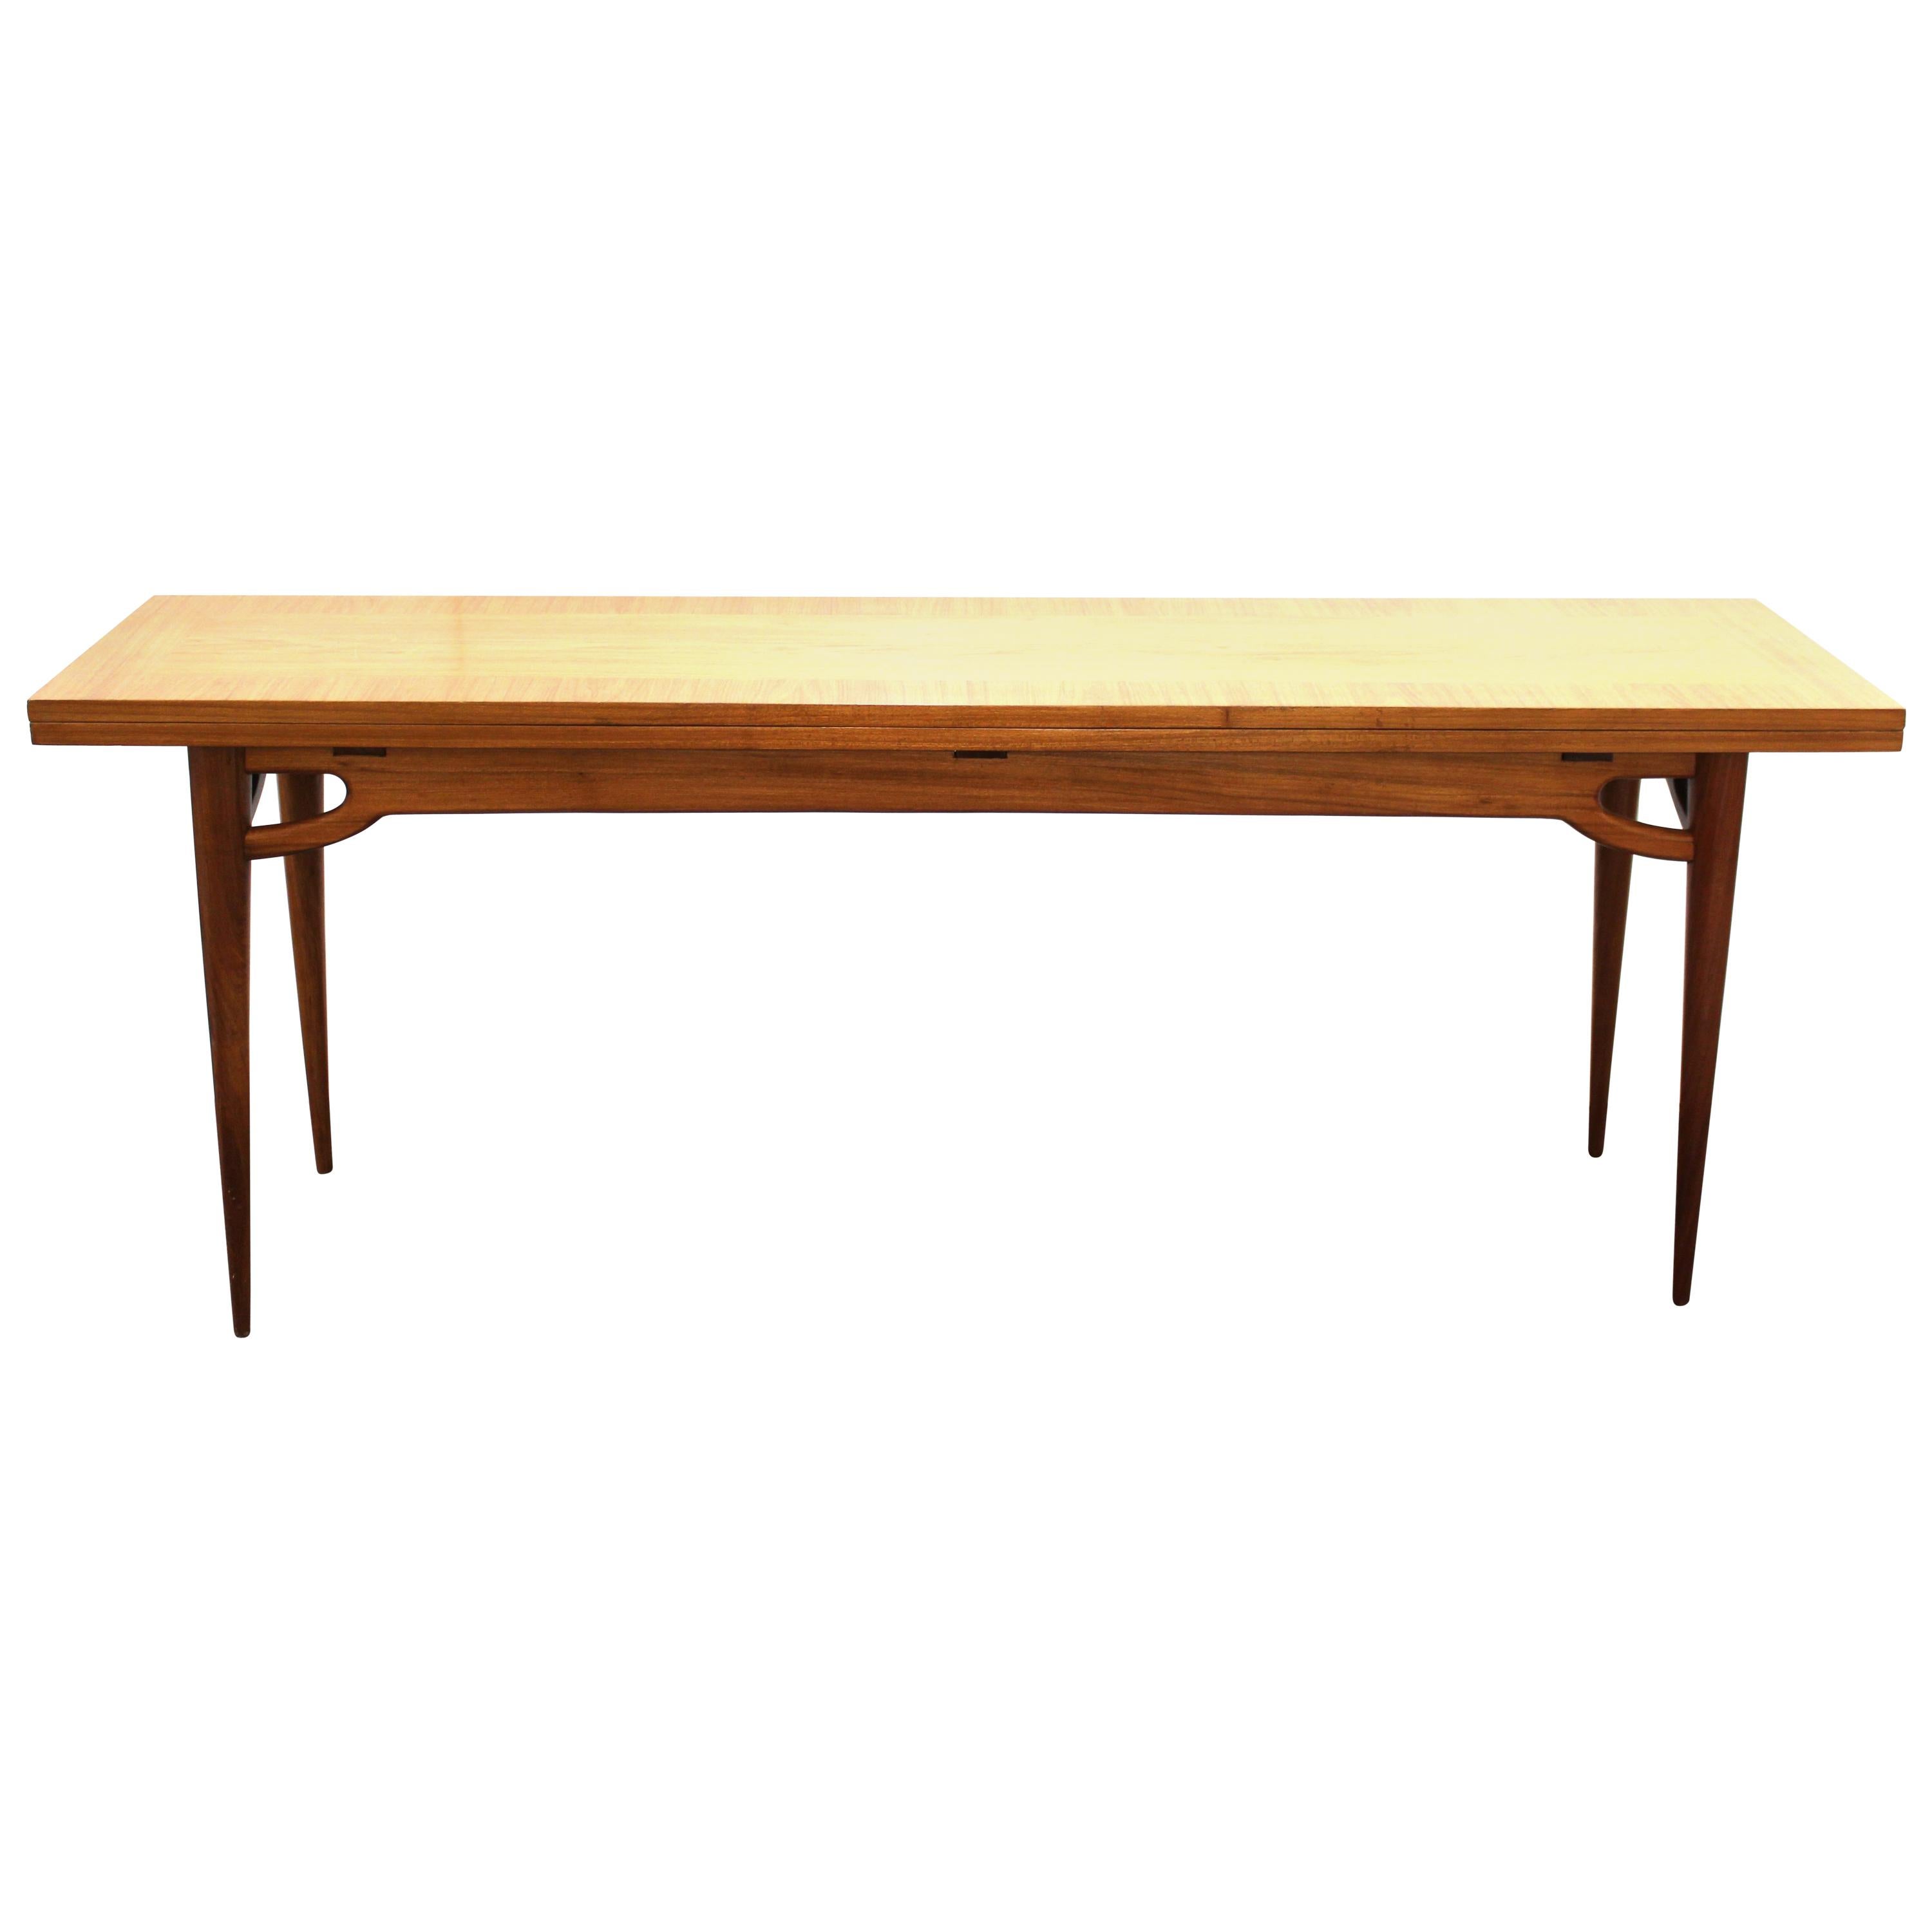 Mid-Century Modern Flip-Top Table Attributed to Edward Wormley